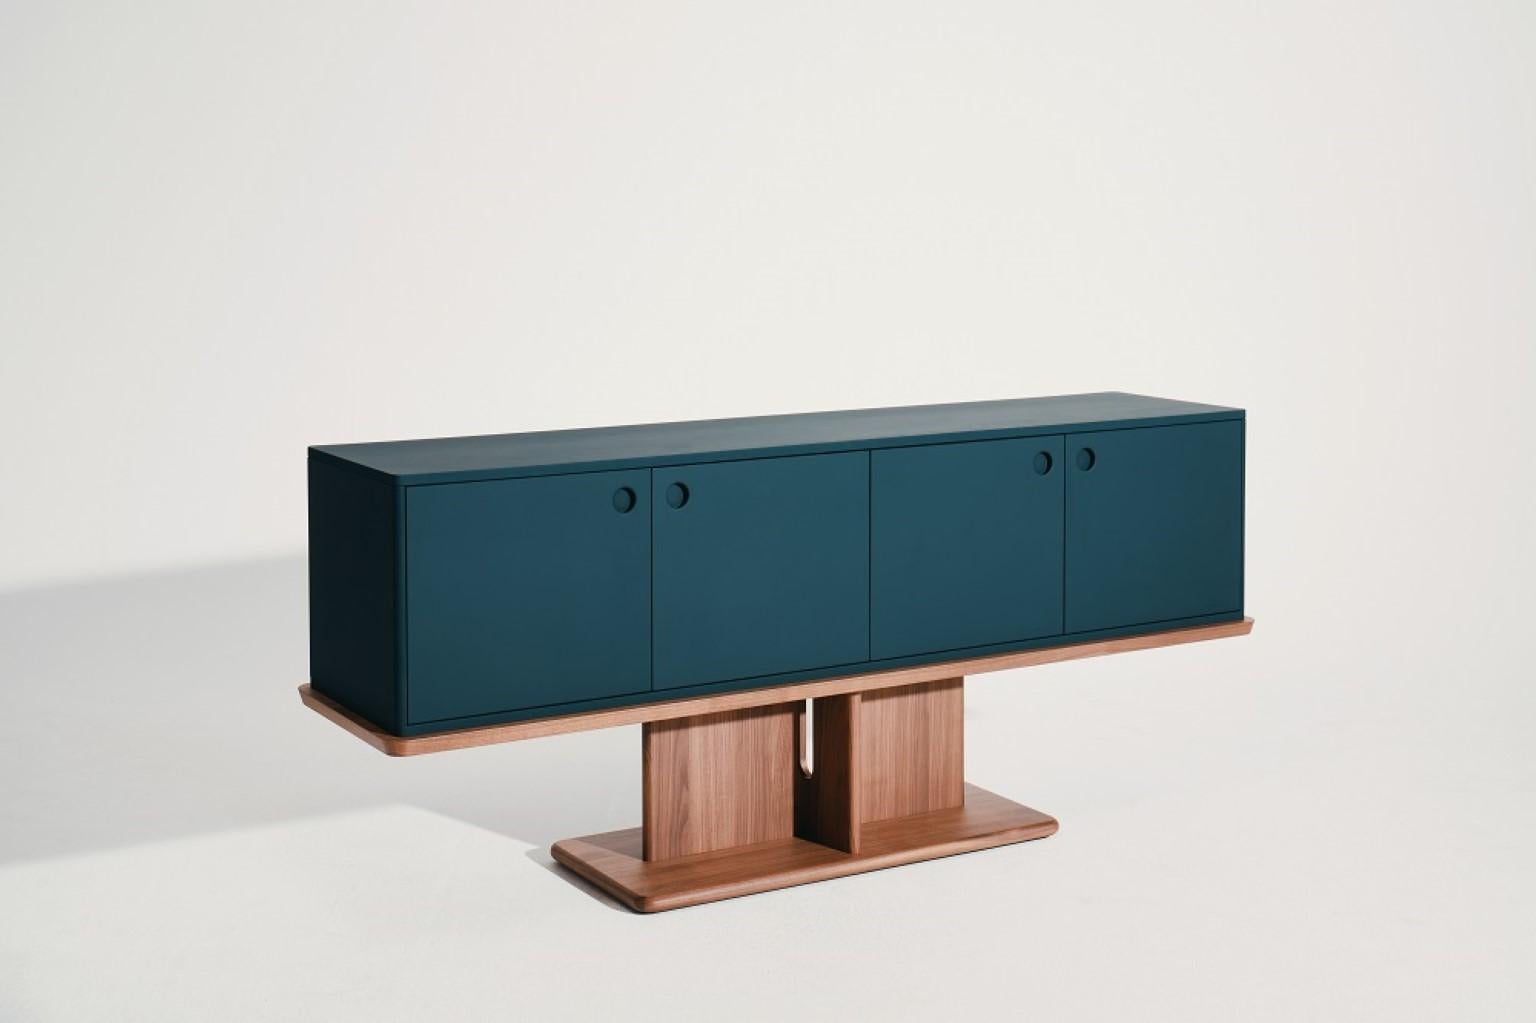 Intersection Commode by Neri&Hu
Dimensions: W 201.8 x D 49 x H 85 cm
Materials: Canaletto Walnut Veneer Wood
Doors: Dark green, prune, warm white lacquered mdf

Founded in 2004 by partners Lyndon Neri and Rossana Hu, Neri&Hu Design and Research